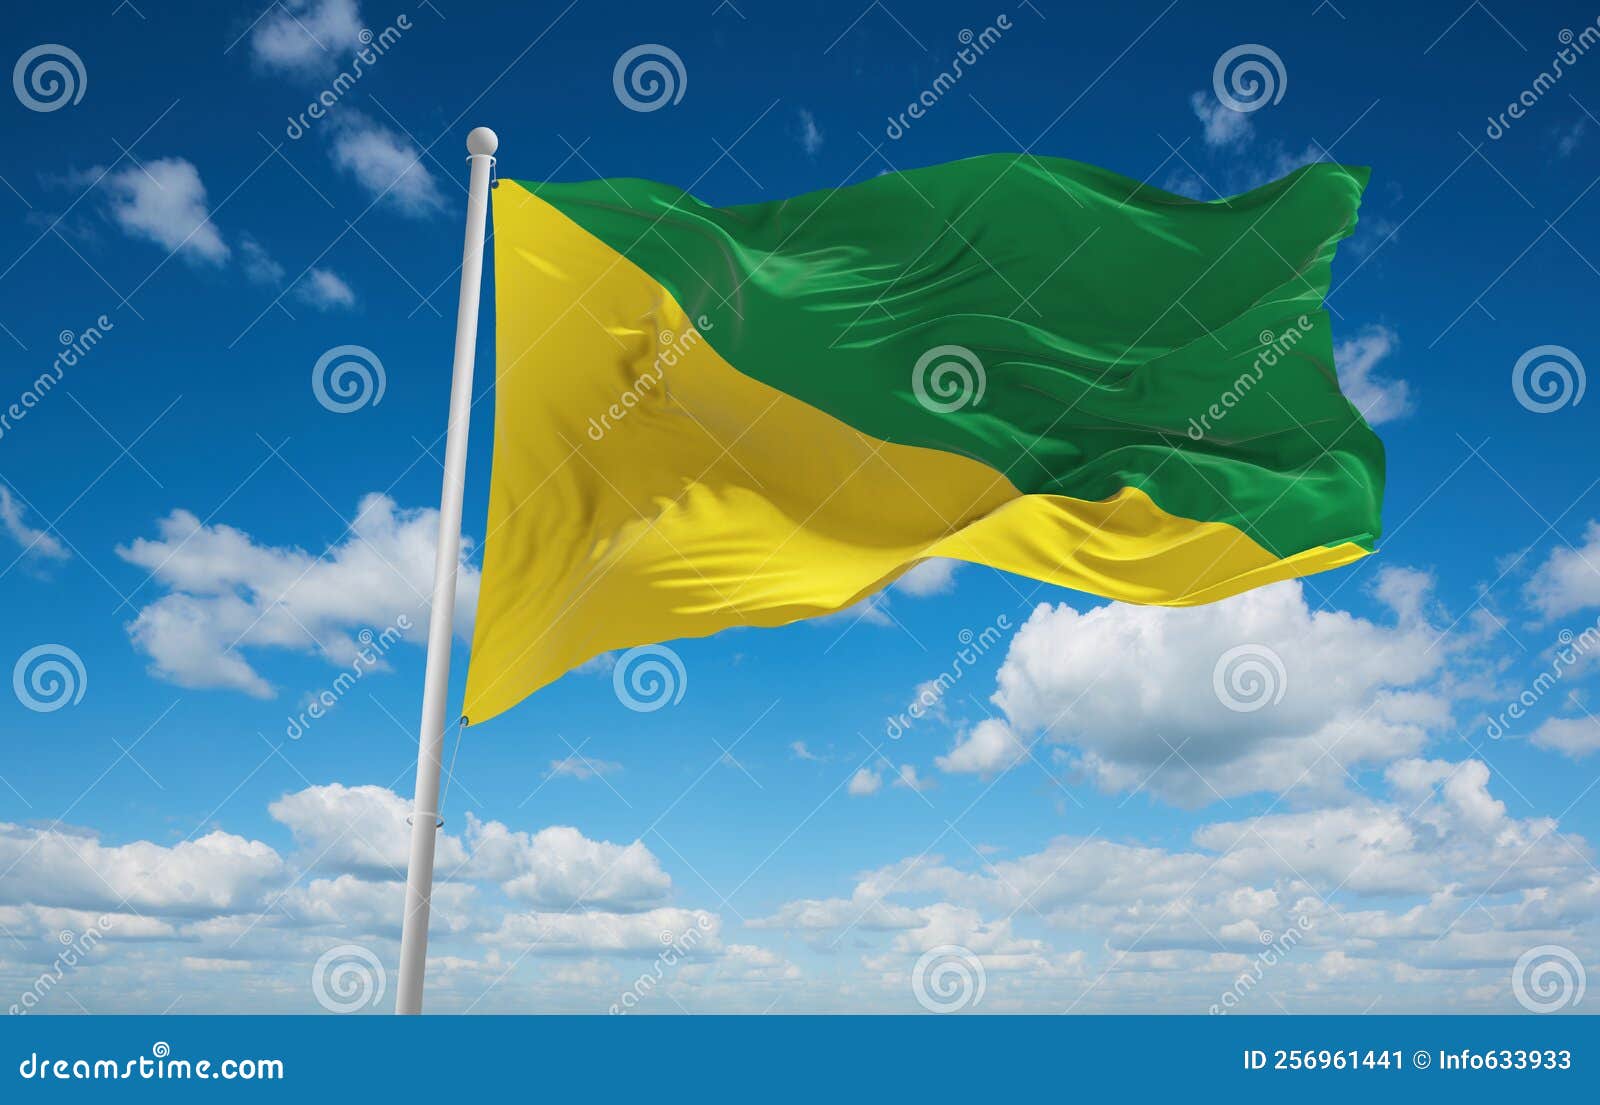 flag of estado independente do acre, america at cloudy sky background, panoramic view. flag representing extinct country,ethnic